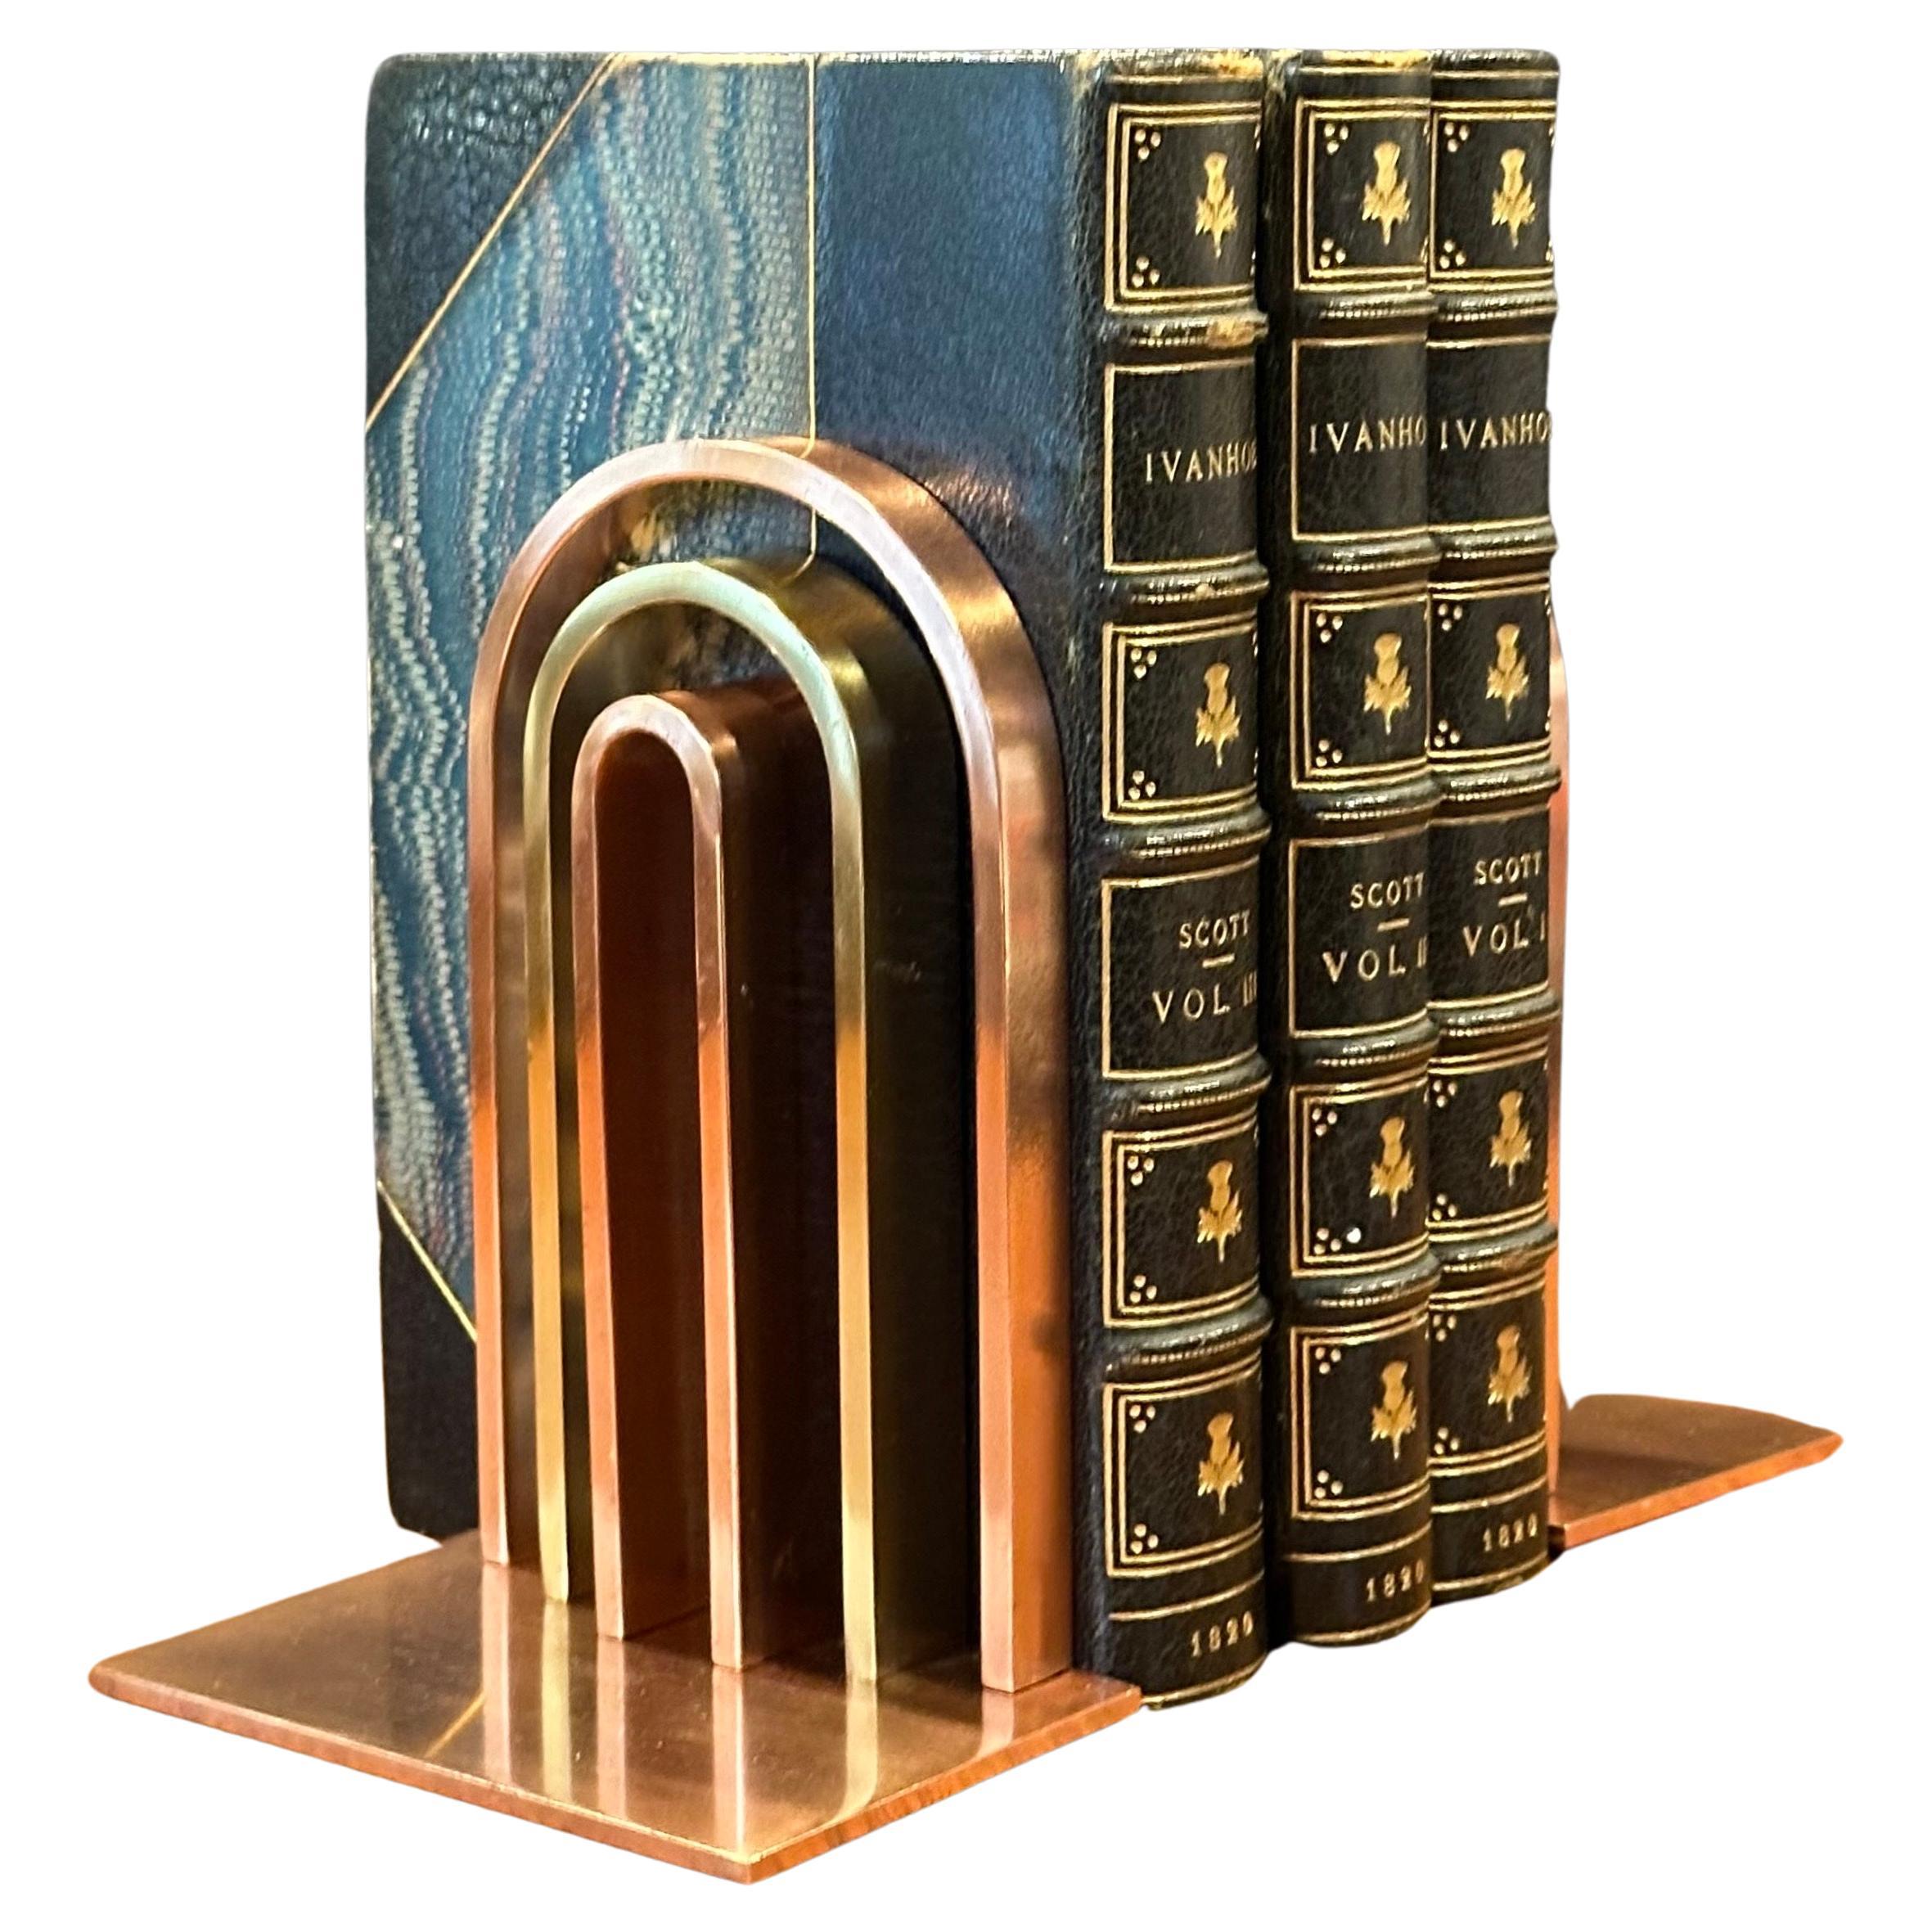 Pair of Machine Age Art Deco "Arch" Bookends by Walter Von Nessen for Chase & Co